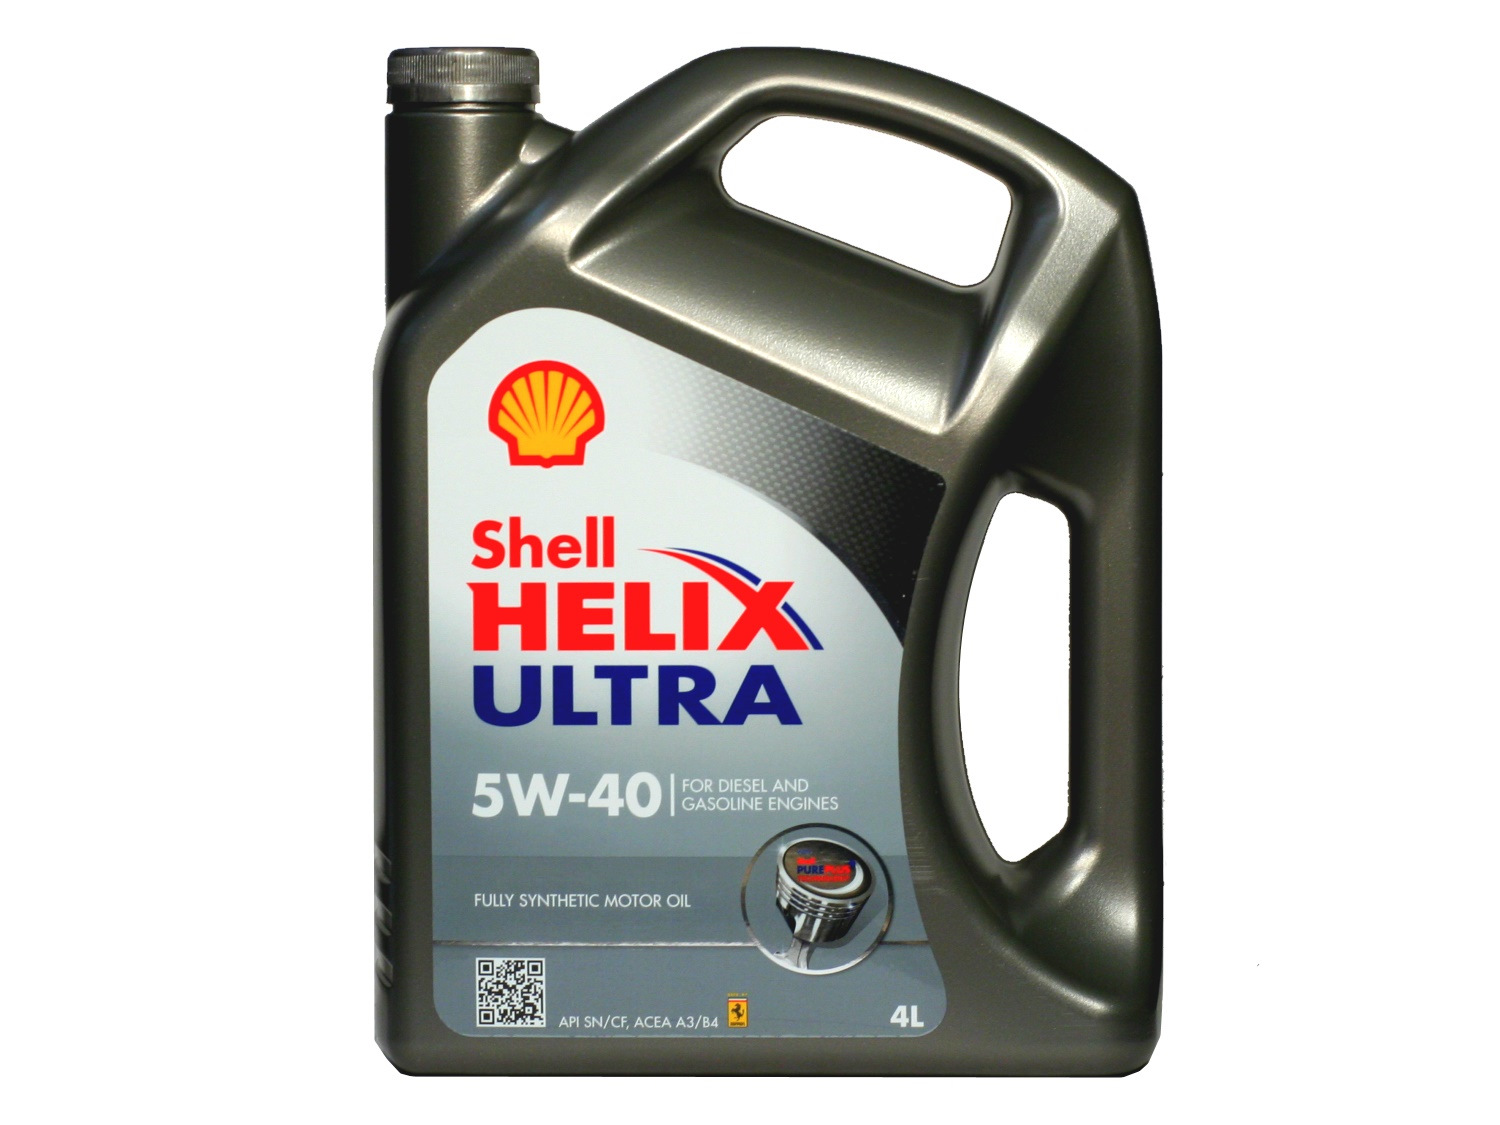 Уфа масло 5w40. Shell Helix Ultra ect 0w-30. Shell Helix Ultra ect c2/c3 0w-30 4 л. Shell Helix Ultra ect c2/c3 0w-30. Shell Helix Ultra 0w30 c2/c3 артикул.